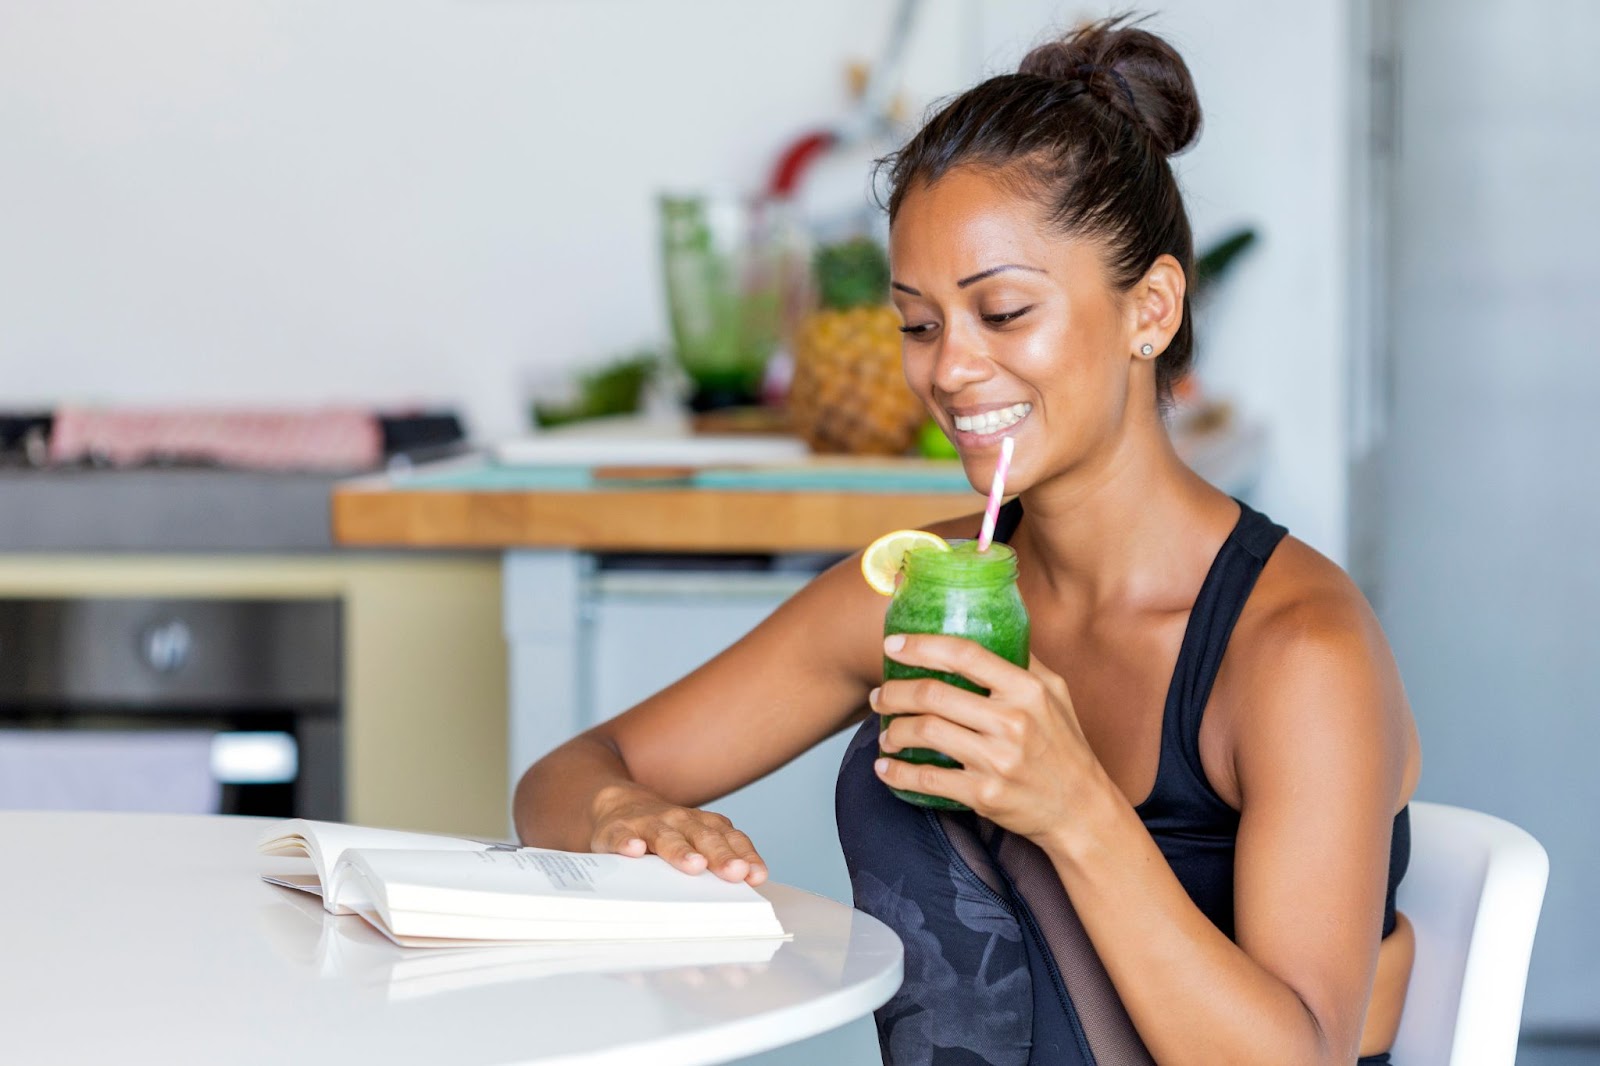 Woman reading a book on Intuitive Eating while sipping a smoothie